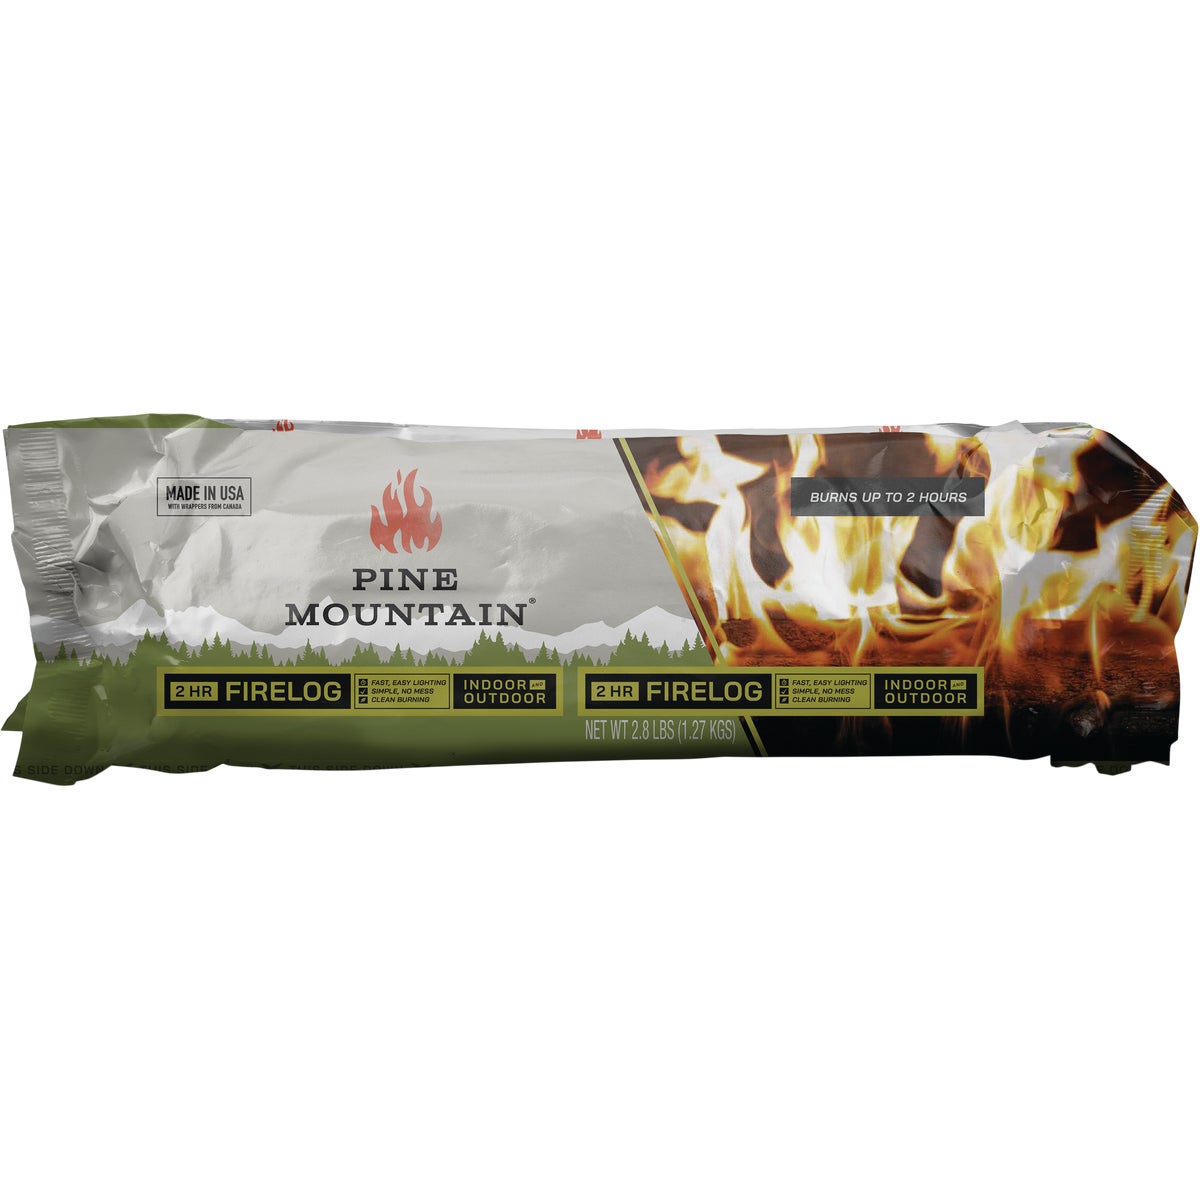 Item 450413, Pine Mountain Firelogs light quickly and easily with big flames.